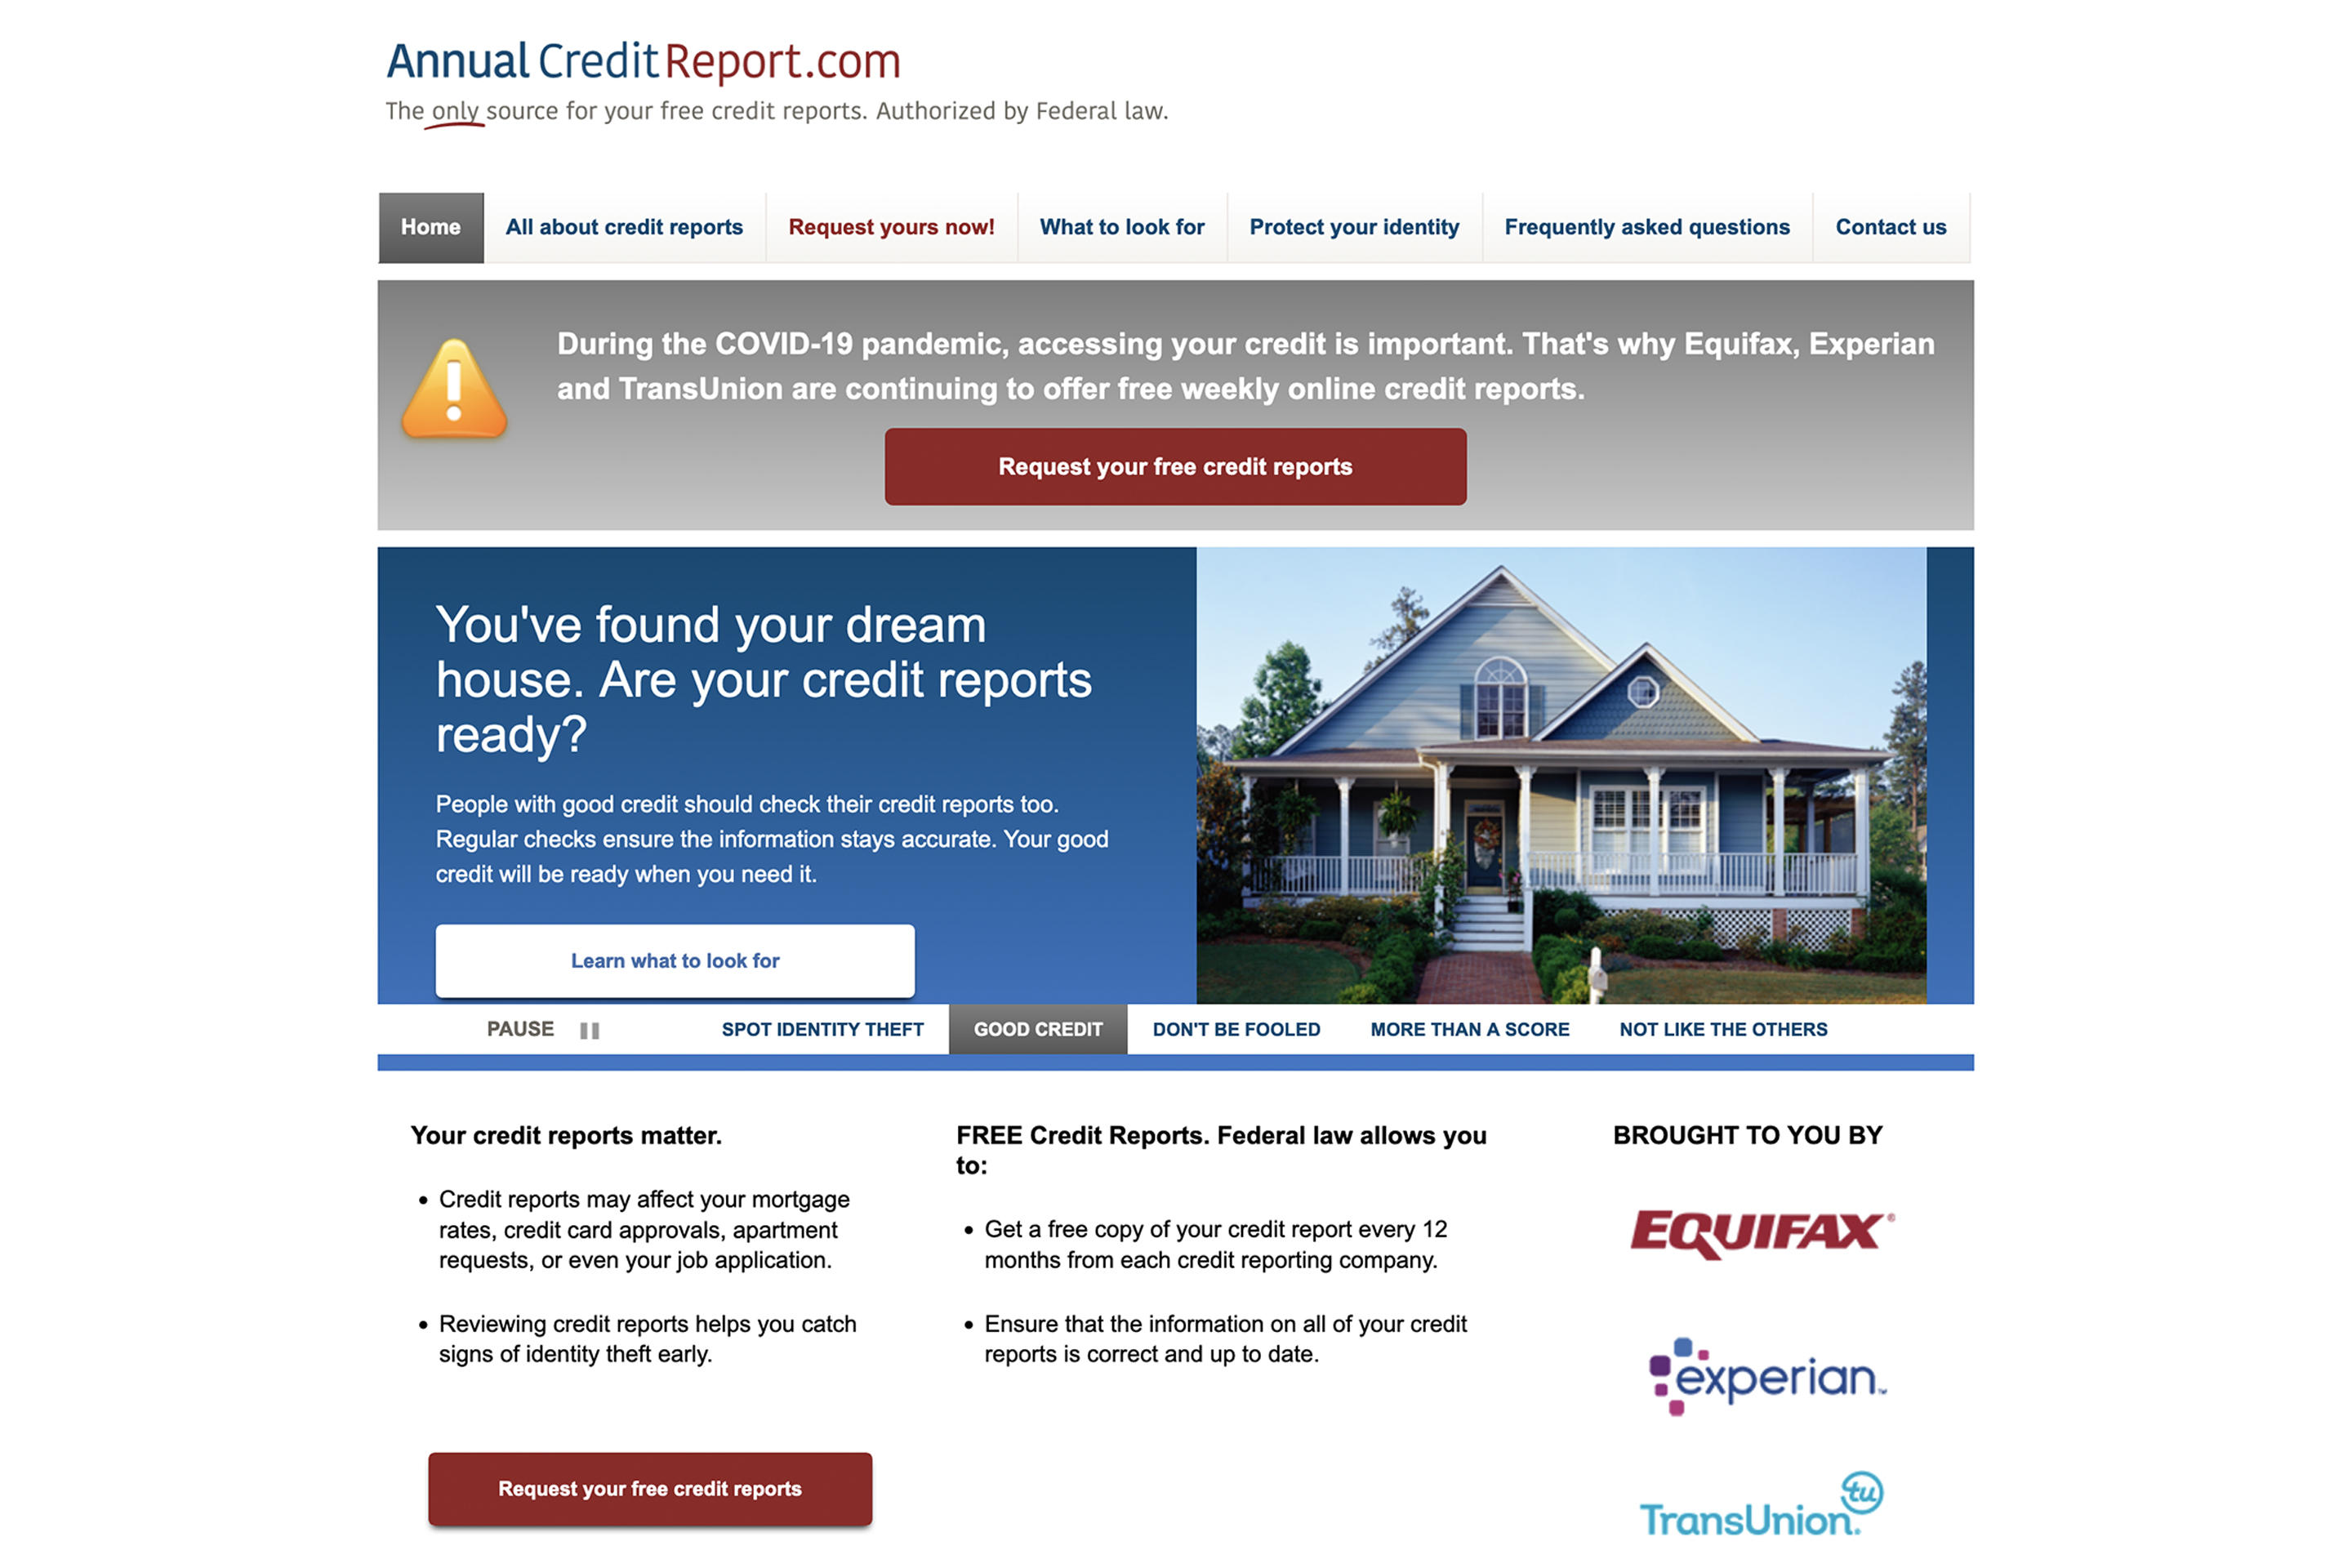 On AnnualCreditReport.com's homepage, you can click through to request your free credit report.